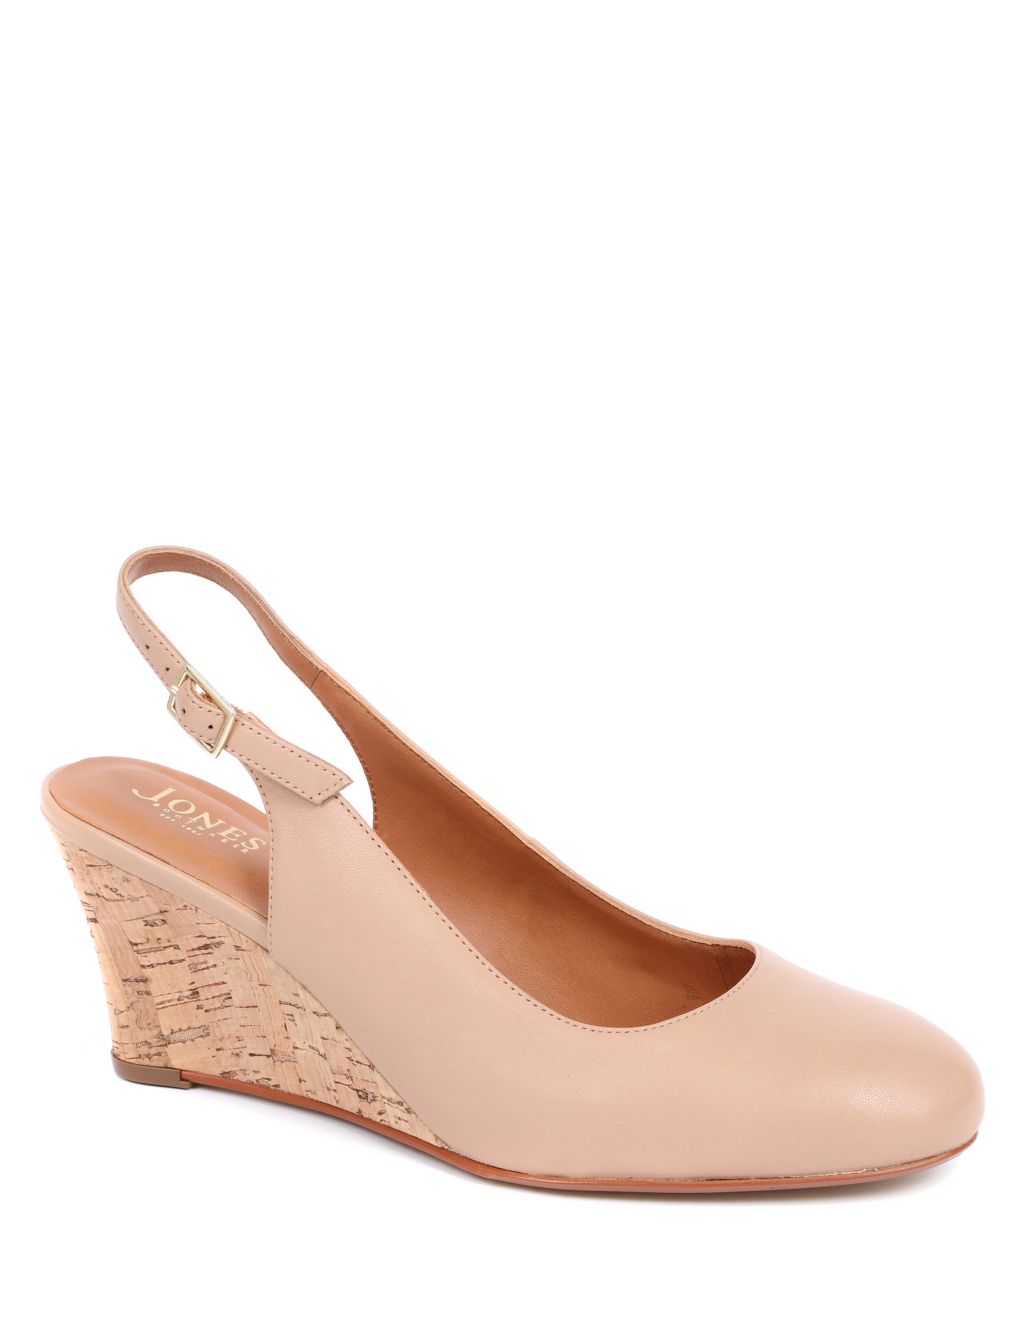 Suede Wedge Slingback Shoes image 2